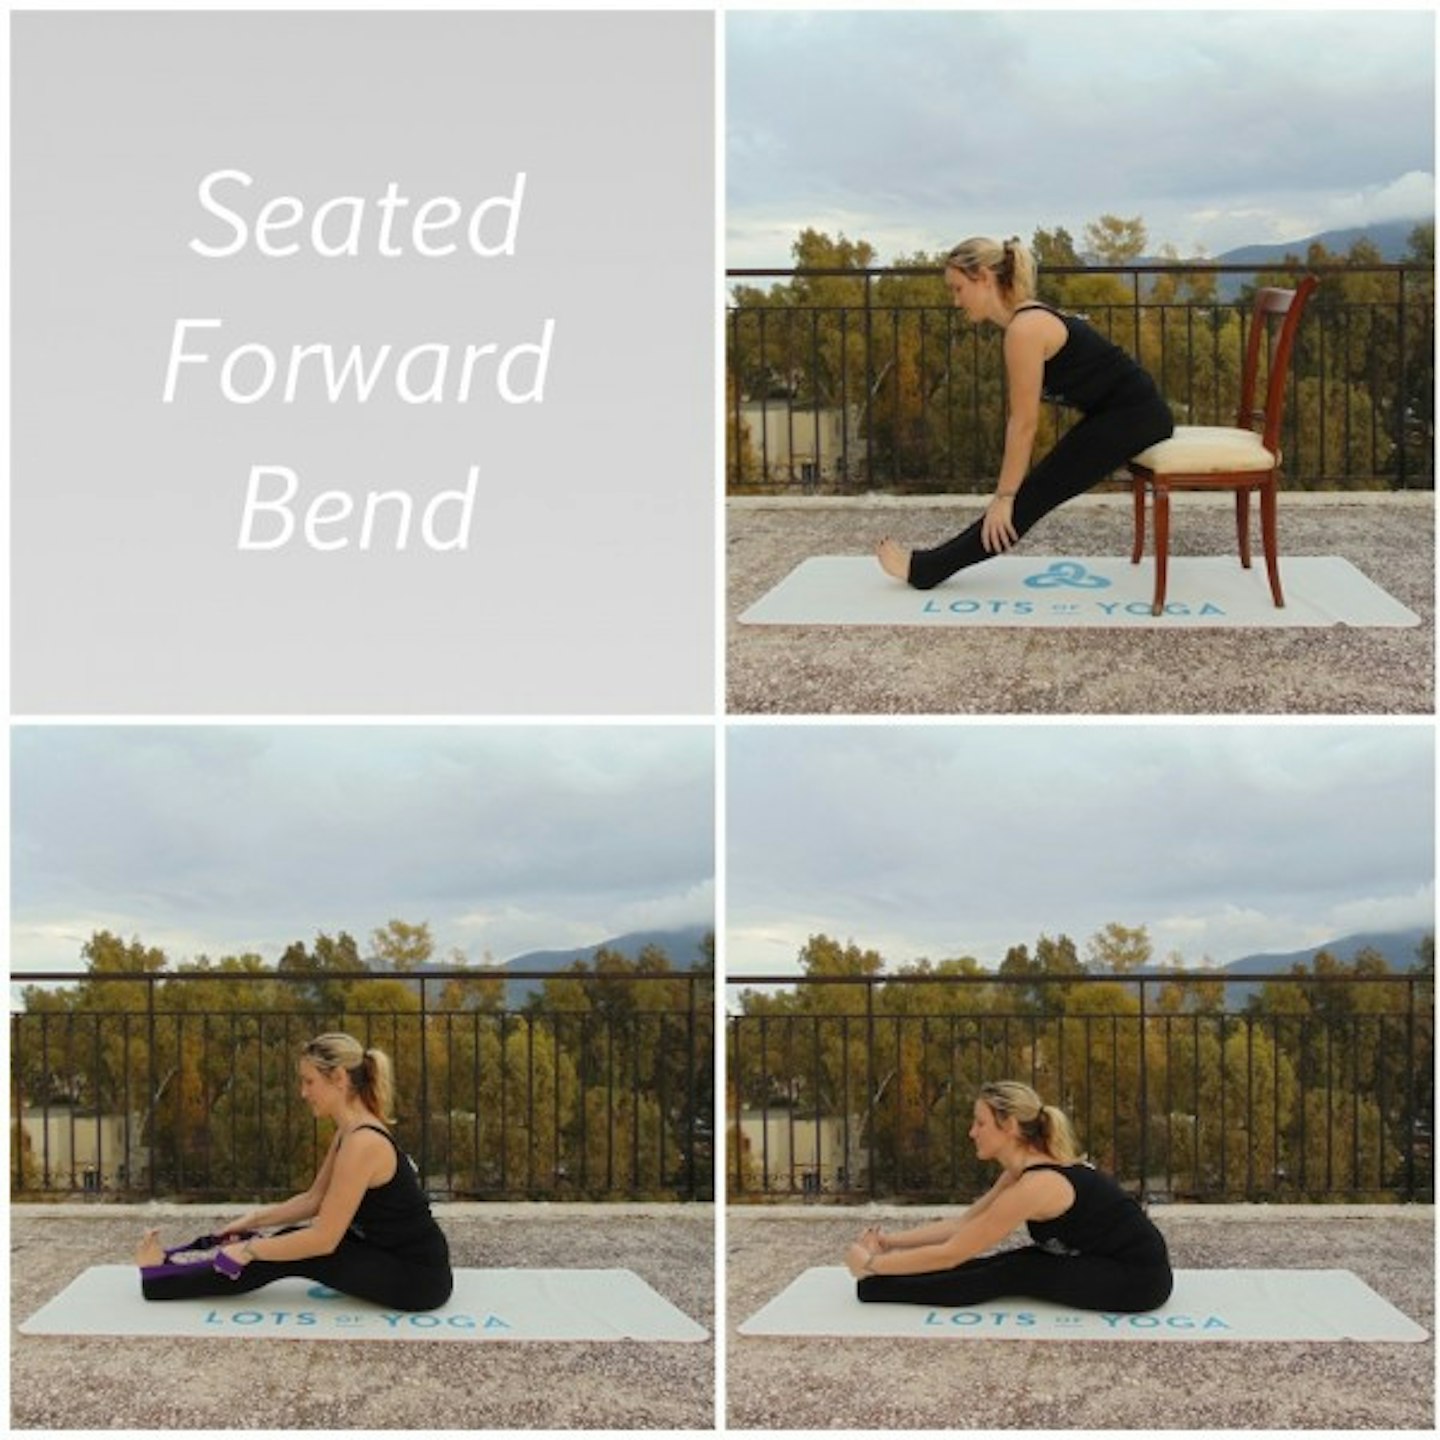 seated-forward-bend-lots-of-yoga-over-50-yours.co_.uk_-600x600